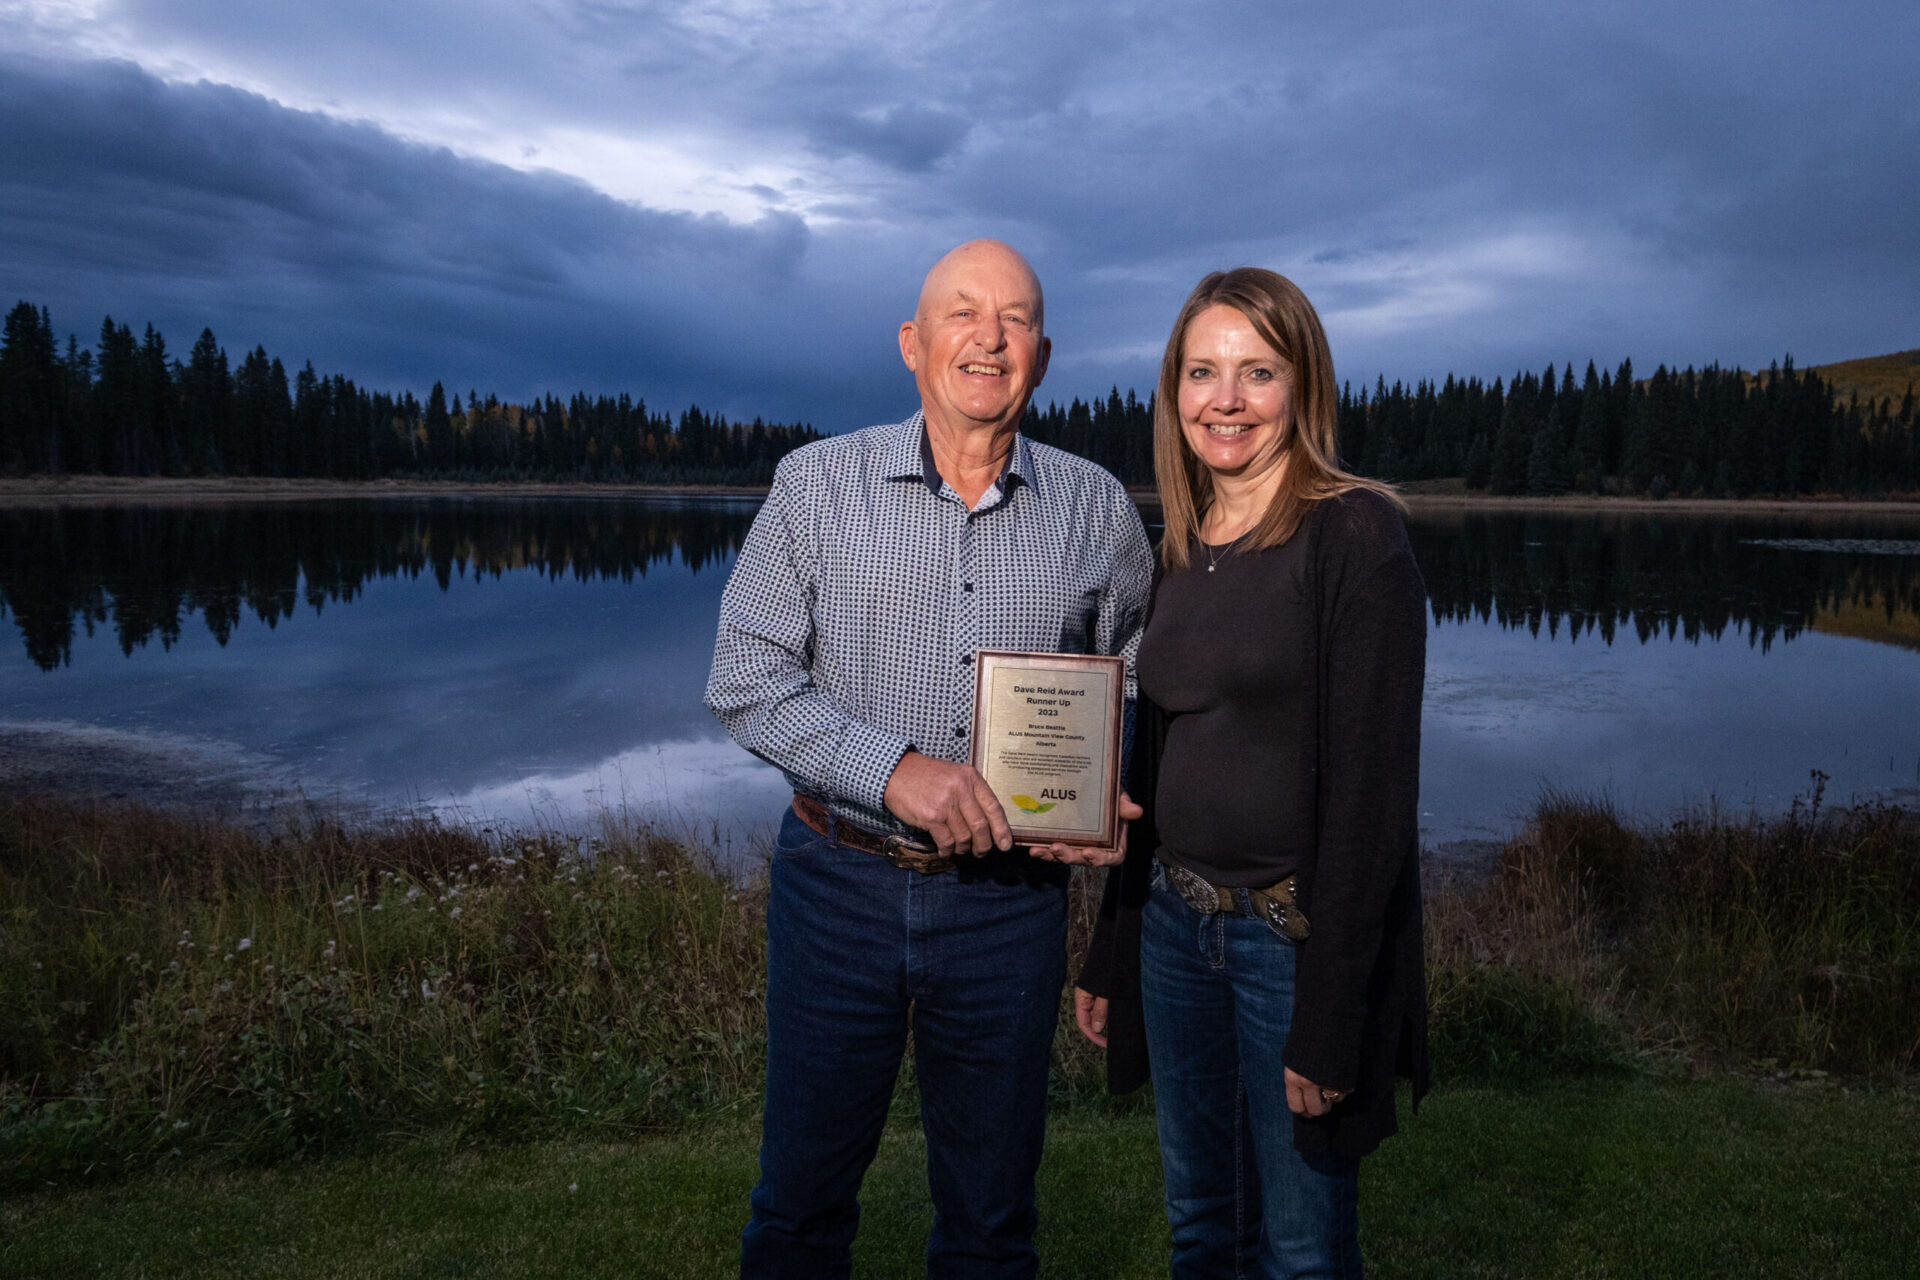  Bruce Beattie (left) is recognized as a runner up for the Dave Reid Award by Lorelee Grattidge, Program Coordinator, ALUS Mountain View County (right). Photo Credit: Keith Ahlstrom